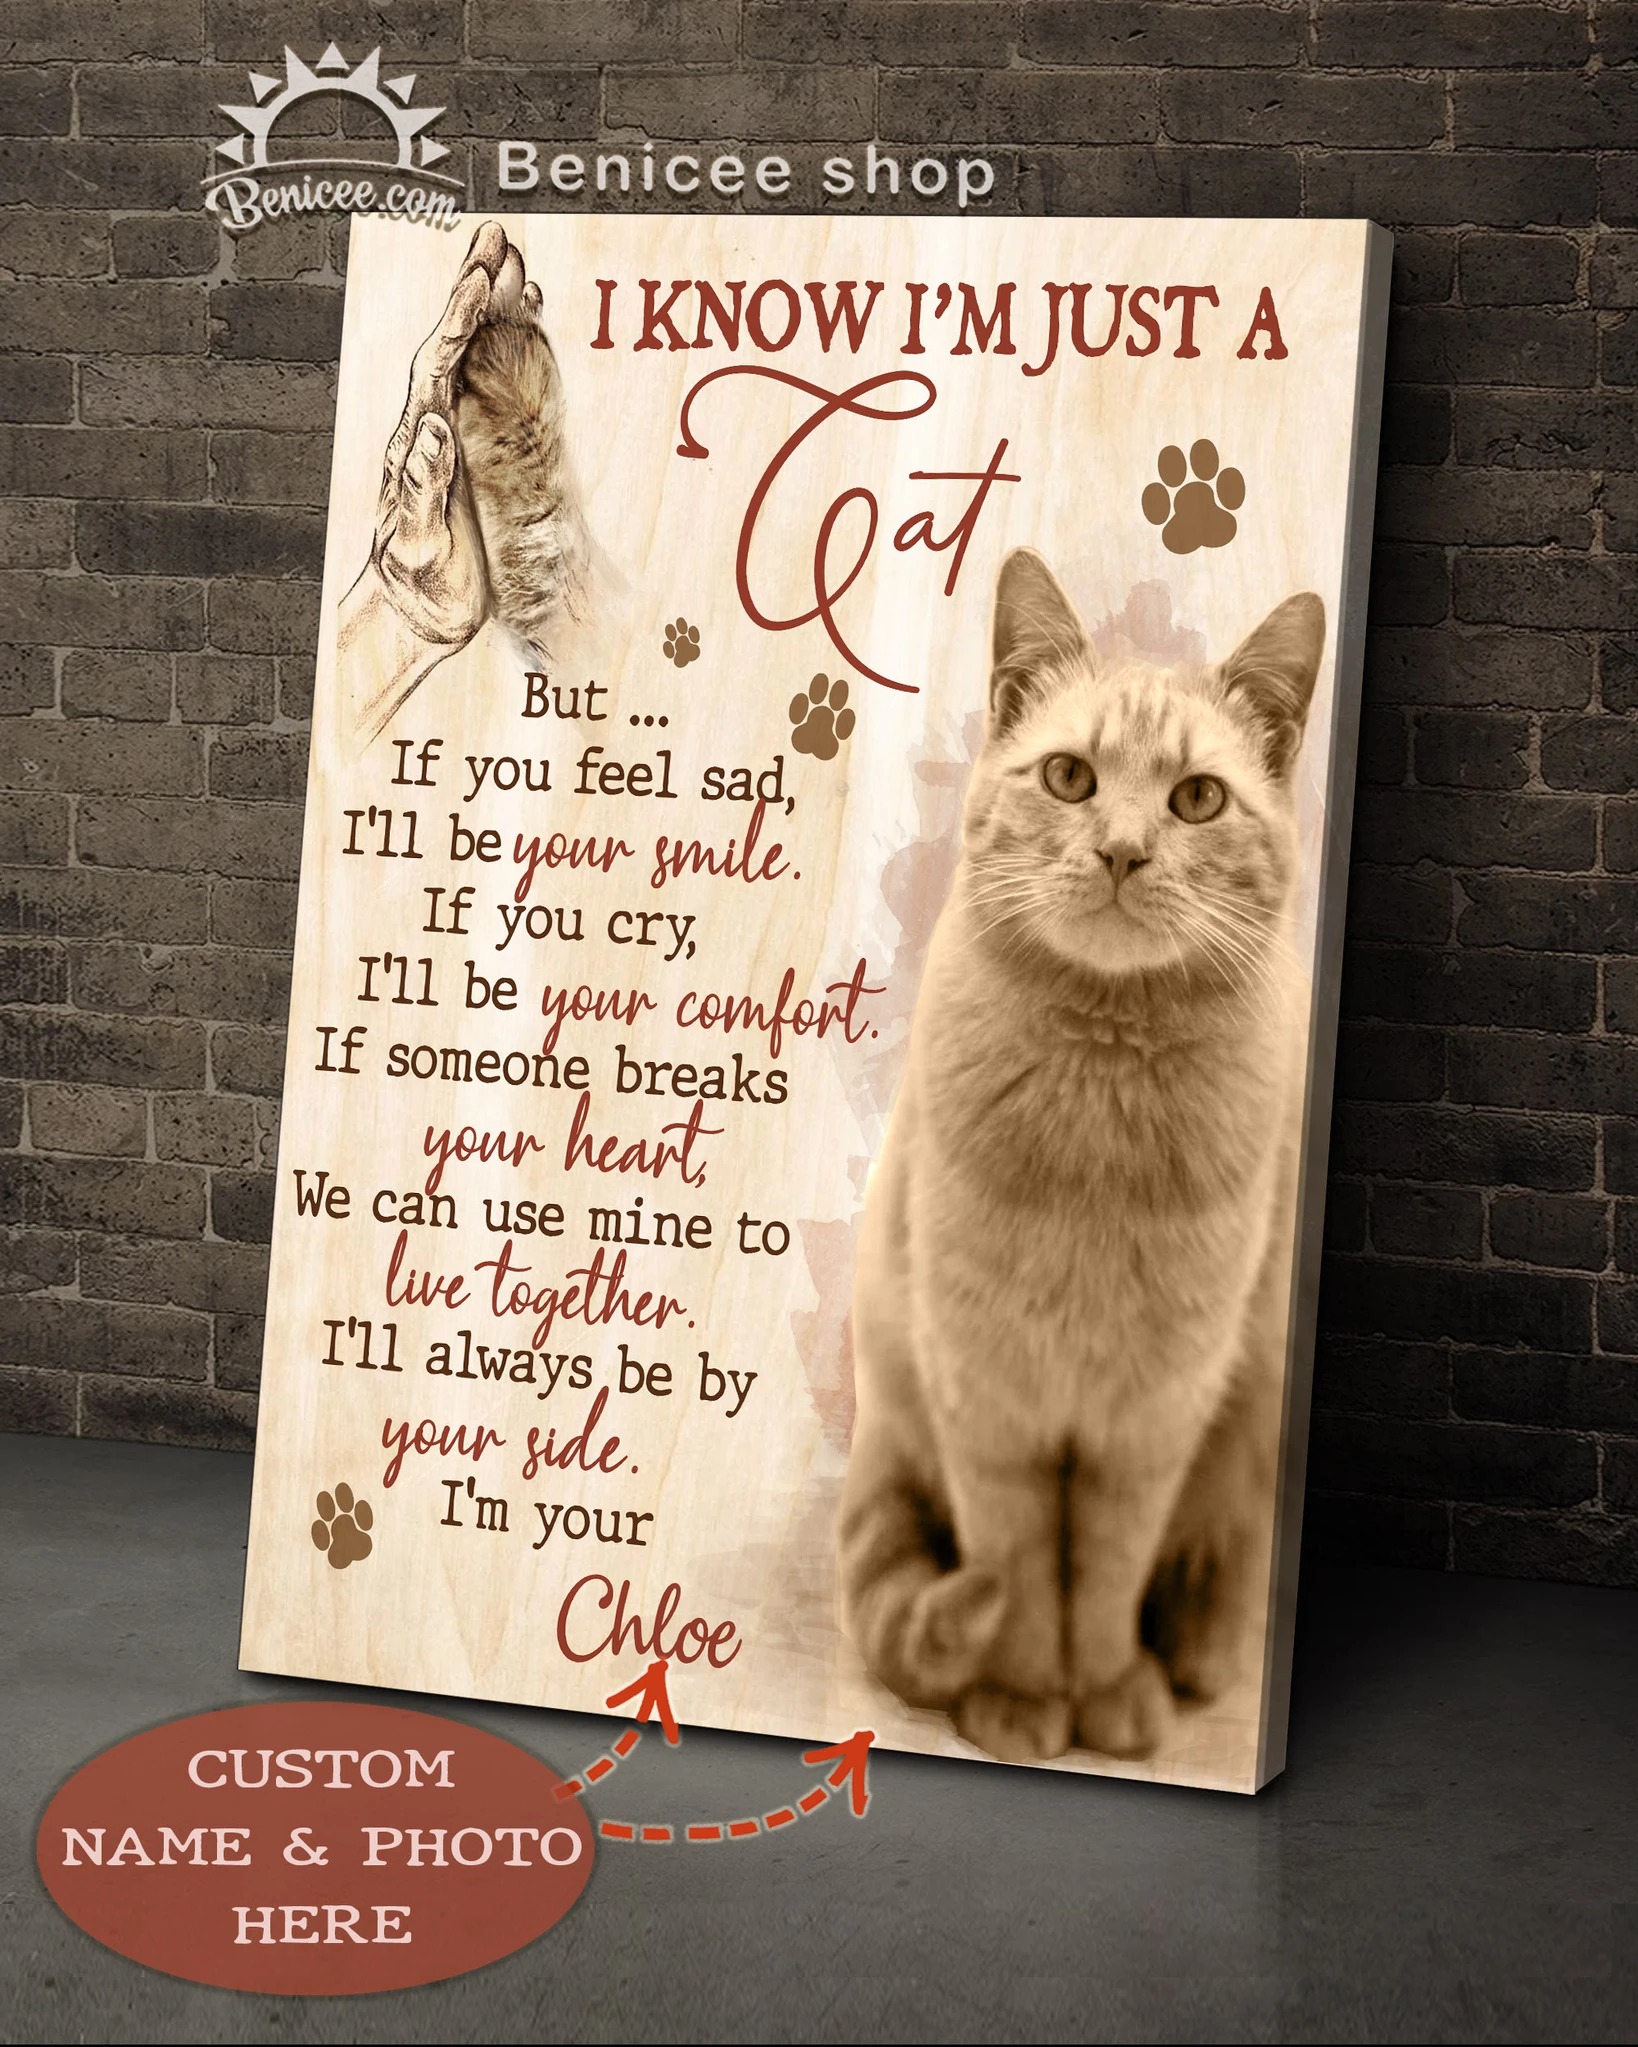 Custom photo and name i know i'm just a cat canvas prints 2